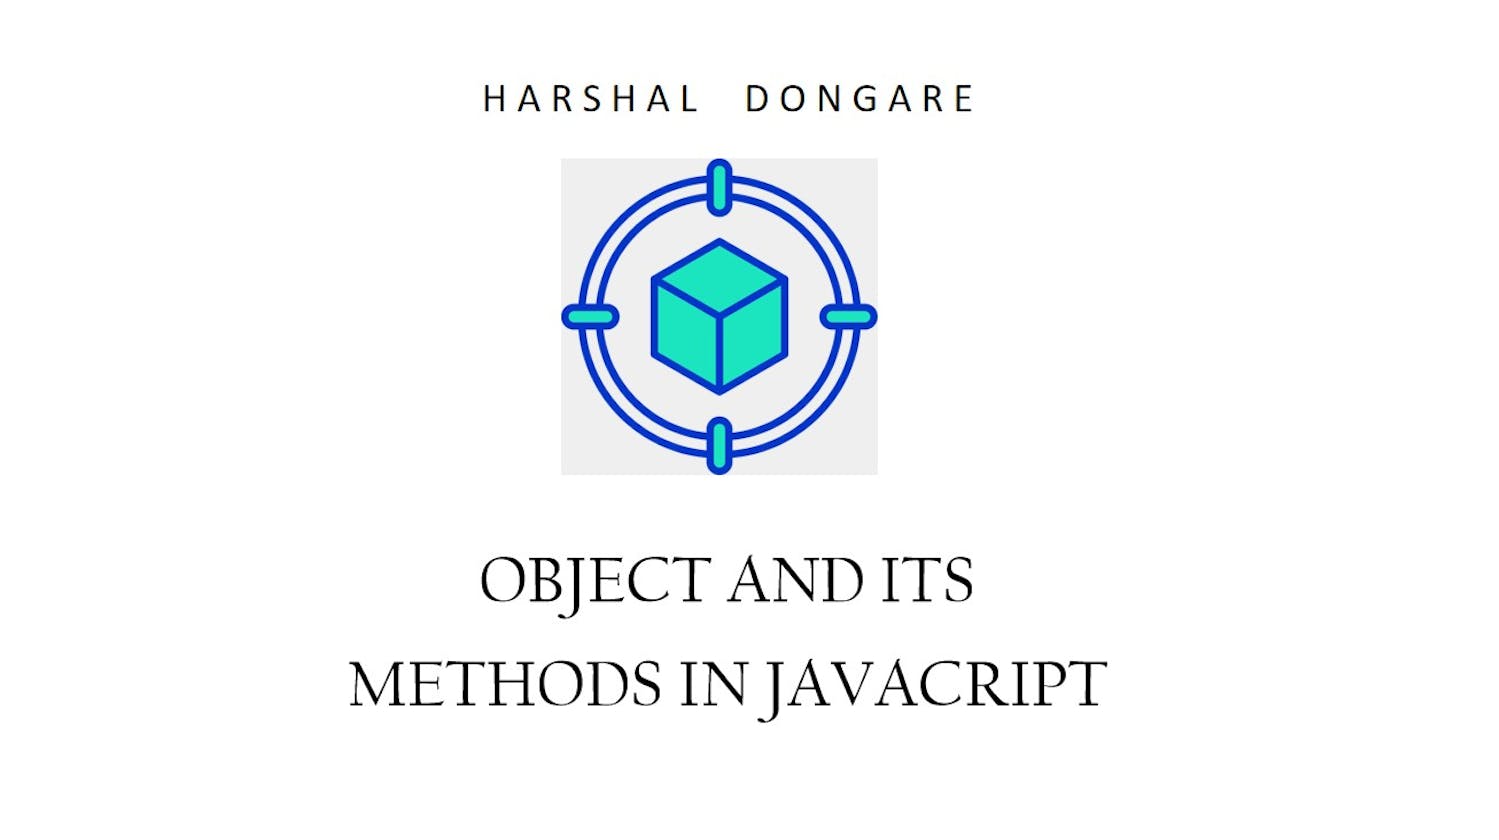 Object and its common methods in javascript